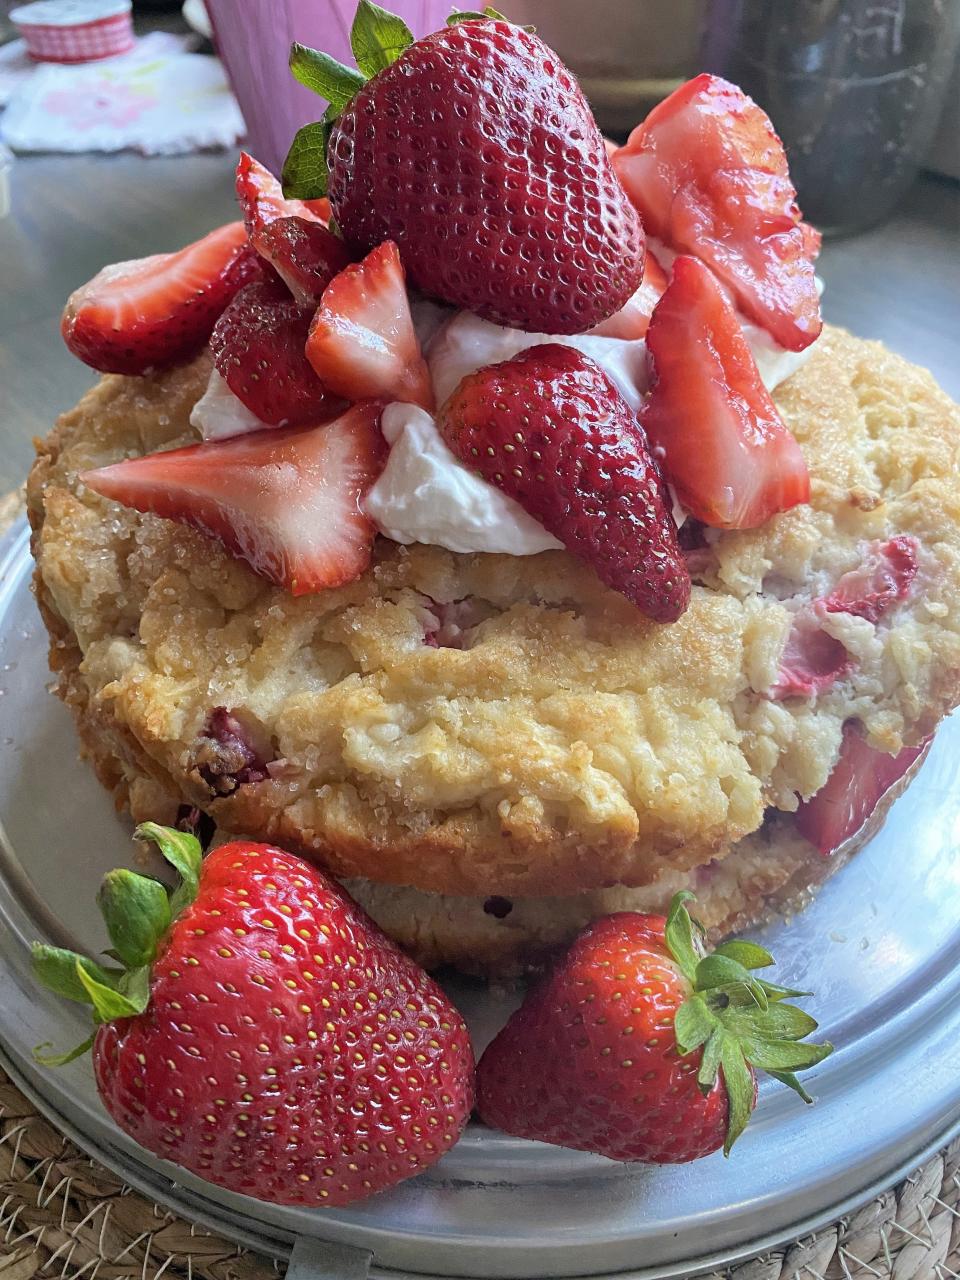 Strawberry shortcake is one of the showstoppers at the Shandon Strawberry Festival this weekend.